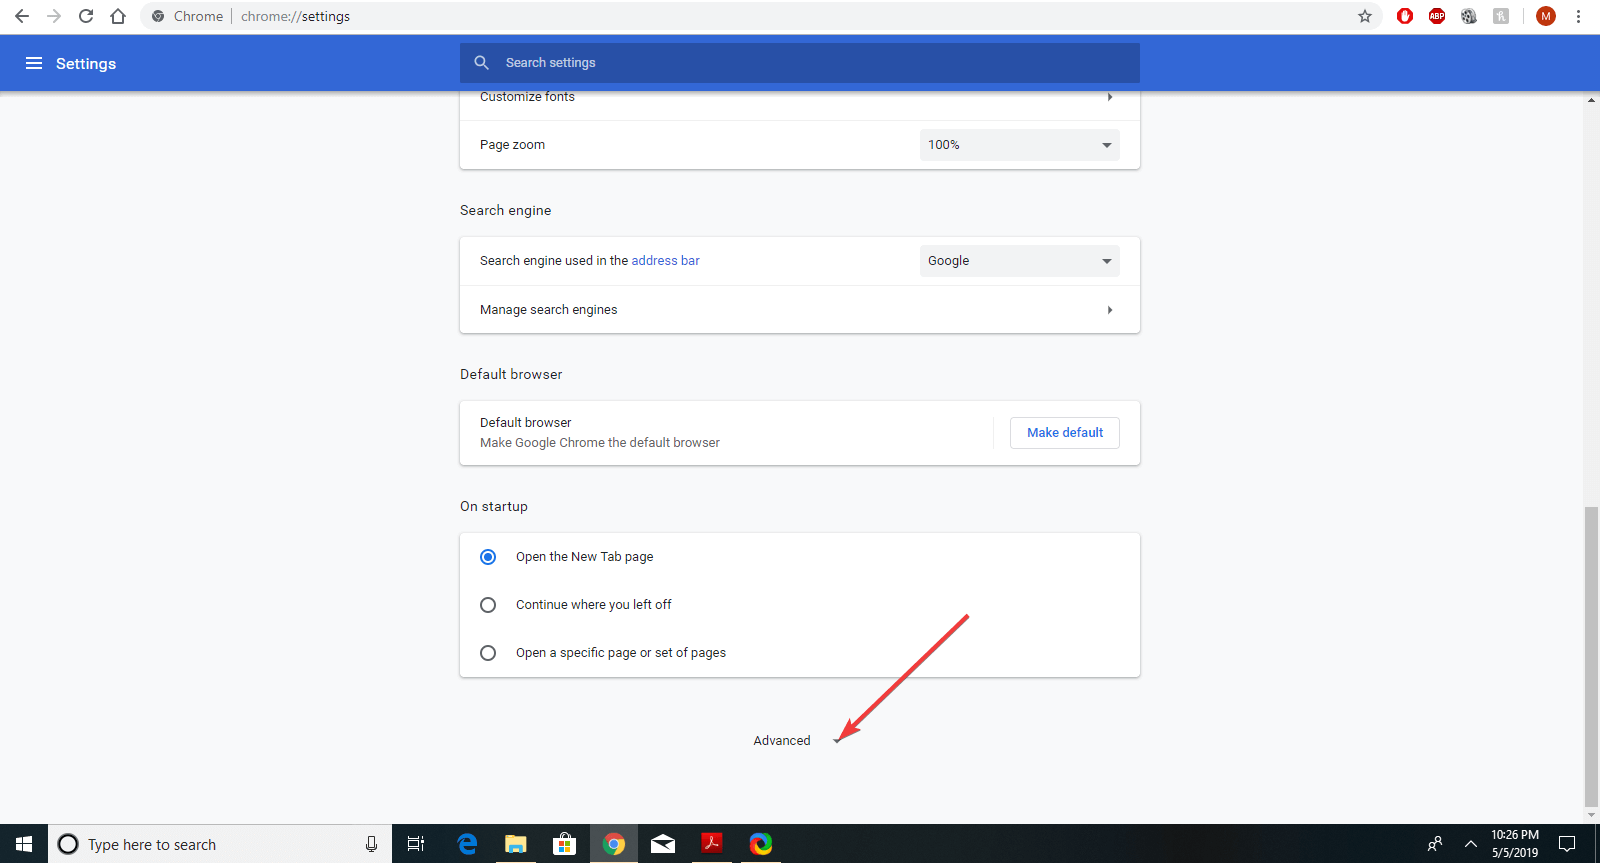 advanced chrome image is not displaying in chrome